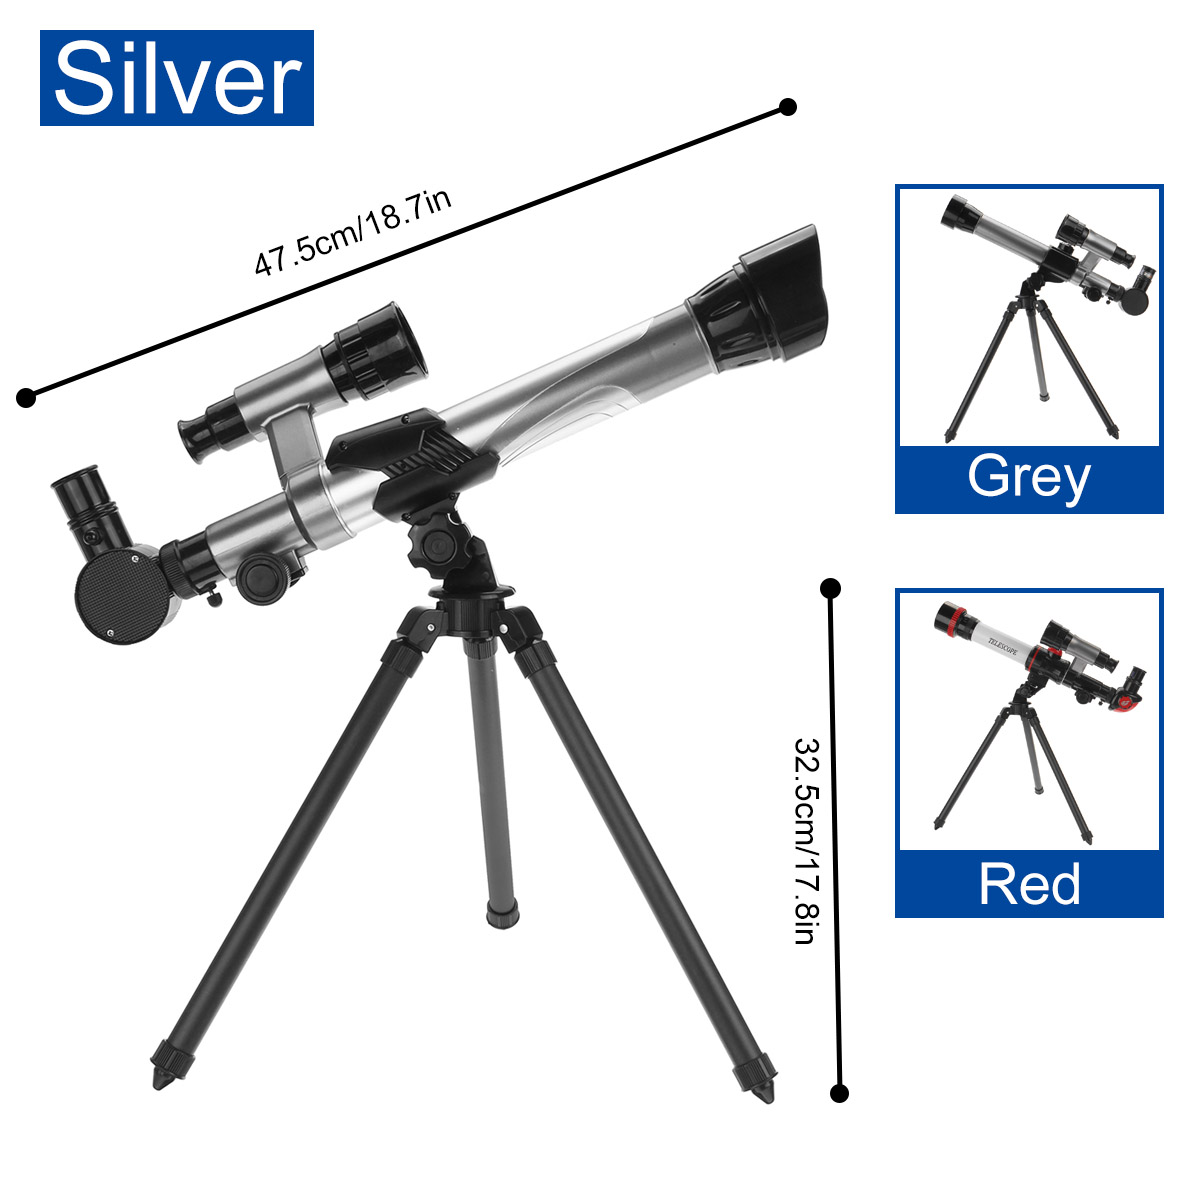 30-40X-Astronomical-Telescope-HD-Refraction-Optical-Monoculars-for-Adult-Kids-Beginners-with-Tripod-1836751-2